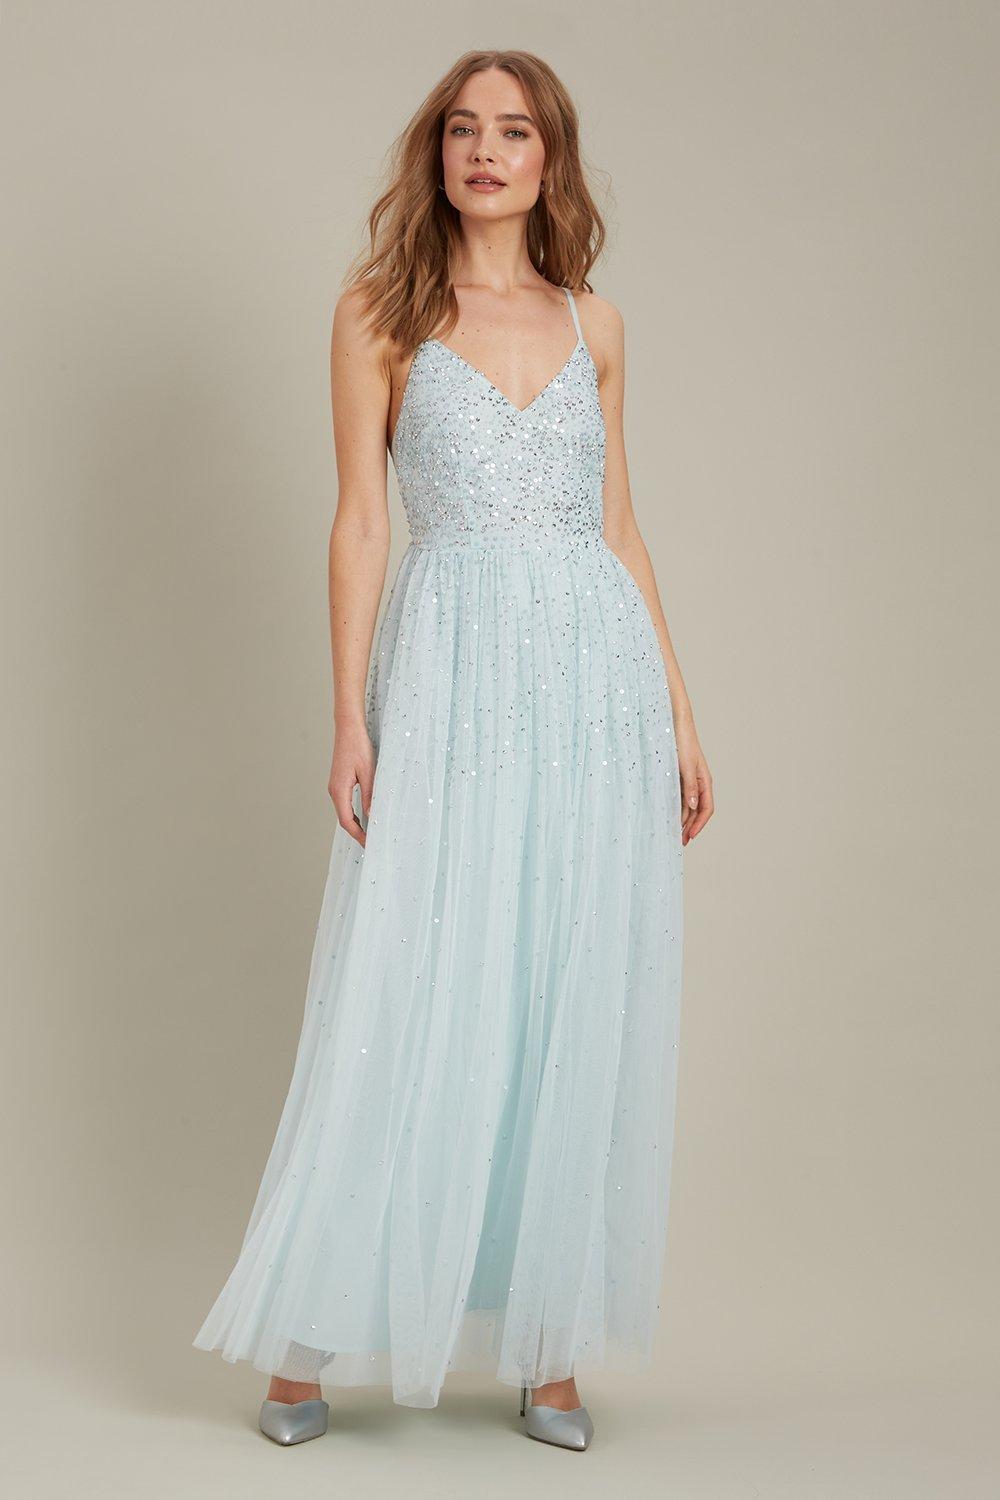 Women’s Embellished Strappy Tulle Maxi Dress - mint - 8